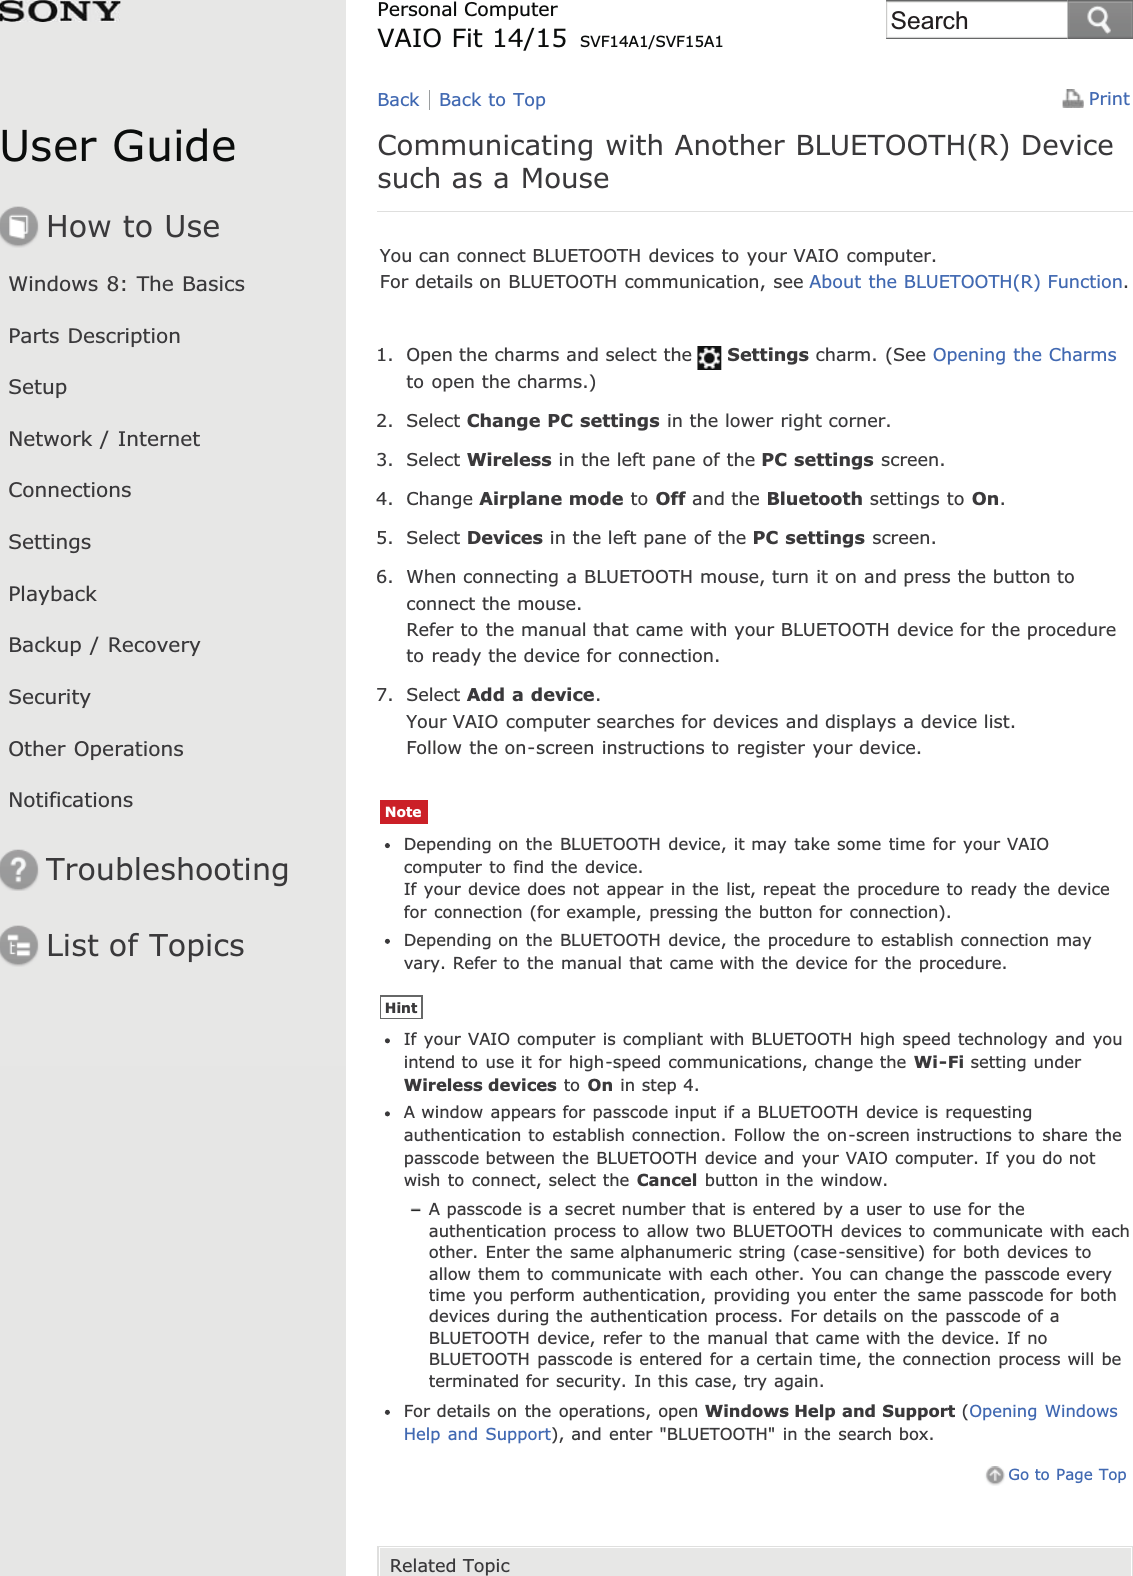 User GuideHow to UseWindows 8: The BasicsParts DescriptionSetupNetwork / InternetConnectionsSettingsPlaybackBackup / RecoverySecurityOther OperationsNotificationsTroubleshootingList of TopicsPrintPersonal ComputerVAIO Fit 14/15 SVF14A1/SVF15A1Communicating with Another BLUETOOTH(R) Devicesuch as a MouseYou can connect BLUETOOTH devices to your VAIO computer.For details on BLUETOOTH communication, see About the BLUETOOTH(R) Function.1. Open the charms and select the Settings charm. (See Opening the Charmsto open the charms.)2. Select Change PC settings in the lower right corner.3. Select Wireless in the left pane of the PC settings screen.4. Change Airplane mode to Off and the Bluetooth settings to On.5. Select Devices in the left pane of the PC settings screen.6. When connecting a BLUETOOTH mouse, turn it on and press the button toconnect the mouse.Refer to the manual that came with your BLUETOOTH device for the procedureto ready the device for connection.7. Select Add a device.Your VAIO computer searches for devices and displays a device list.Follow the on-screen instructions to register your device.NoteDepending on the BLUETOOTH device, it may take some time for your VAIOcomputer to find the device.If your device does not appear in the list, repeat the procedure to ready the devicefor connection (for example, pressing the button for connection).Depending on the BLUETOOTH device, the procedure to establish connection mayvary. Refer to the manual that came with the device for the procedure.HintIf your VAIO computer is compliant with BLUETOOTH high speed technology and youintend to use it for high-speed communications, change the Wi-Fi setting underWireless devices to On in step 4.A window appears for passcode input if a BLUETOOTH device is requestingauthentication to establish connection. Follow the on-screen instructions to share thepasscode between the BLUETOOTH device and your VAIO computer. If you do notwish to connect, select the Cancel button in the window.A passcode is a secret number that is entered by a user to use for theauthentication process to allow two BLUETOOTH devices to communicate with eachother. Enter the same alphanumeric string (case-sensitive) for both devices toallow them to communicate with each other. You can change the passcode everytime you perform authentication, providing you enter the same passcode for bothdevices during the authentication process. For details on the passcode of aBLUETOOTH device, refer to the manual that came with the device. If noBLUETOOTH passcode is entered for a certain time, the connection process will beterminated for security. In this case, try again.For details on the operations, open Windows Help and Support (Opening WindowsHelp and Support), and enter &quot;BLUETOOTH&quot; in the search box.Go to Page TopRelated TopicBack Back to TopSearch